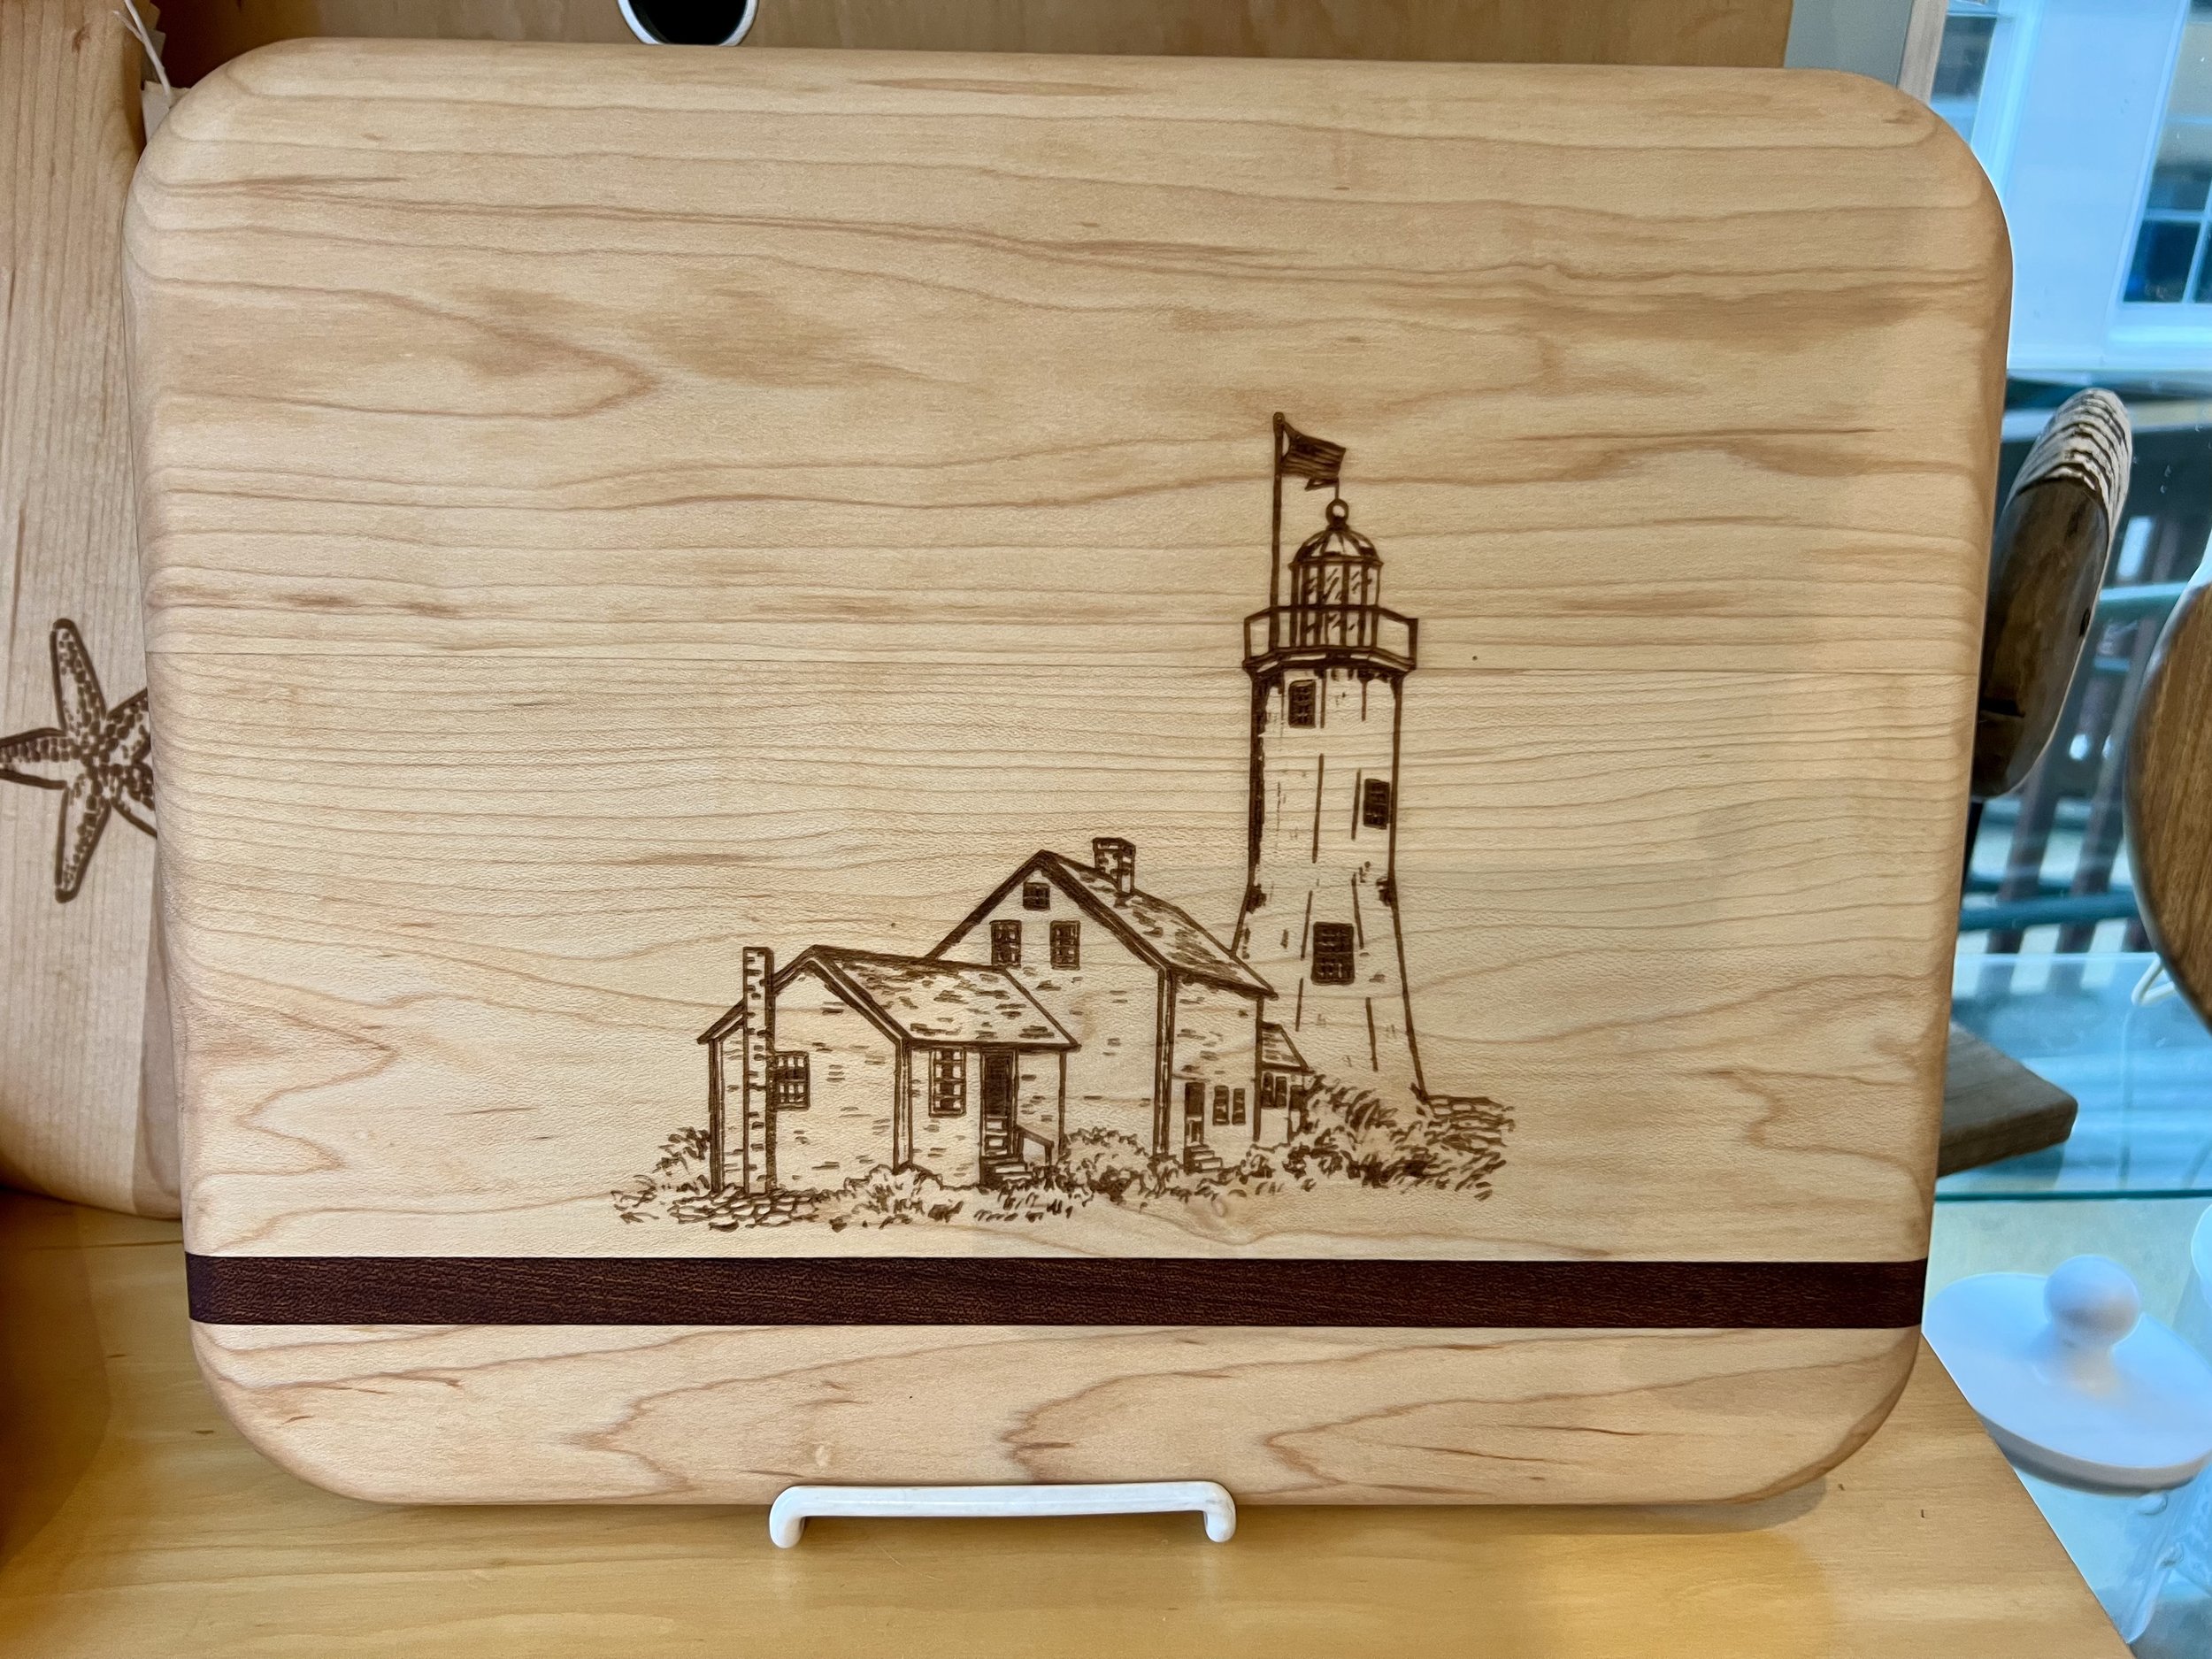 40137 - Scituate Lighthouse Cutting Board - $72